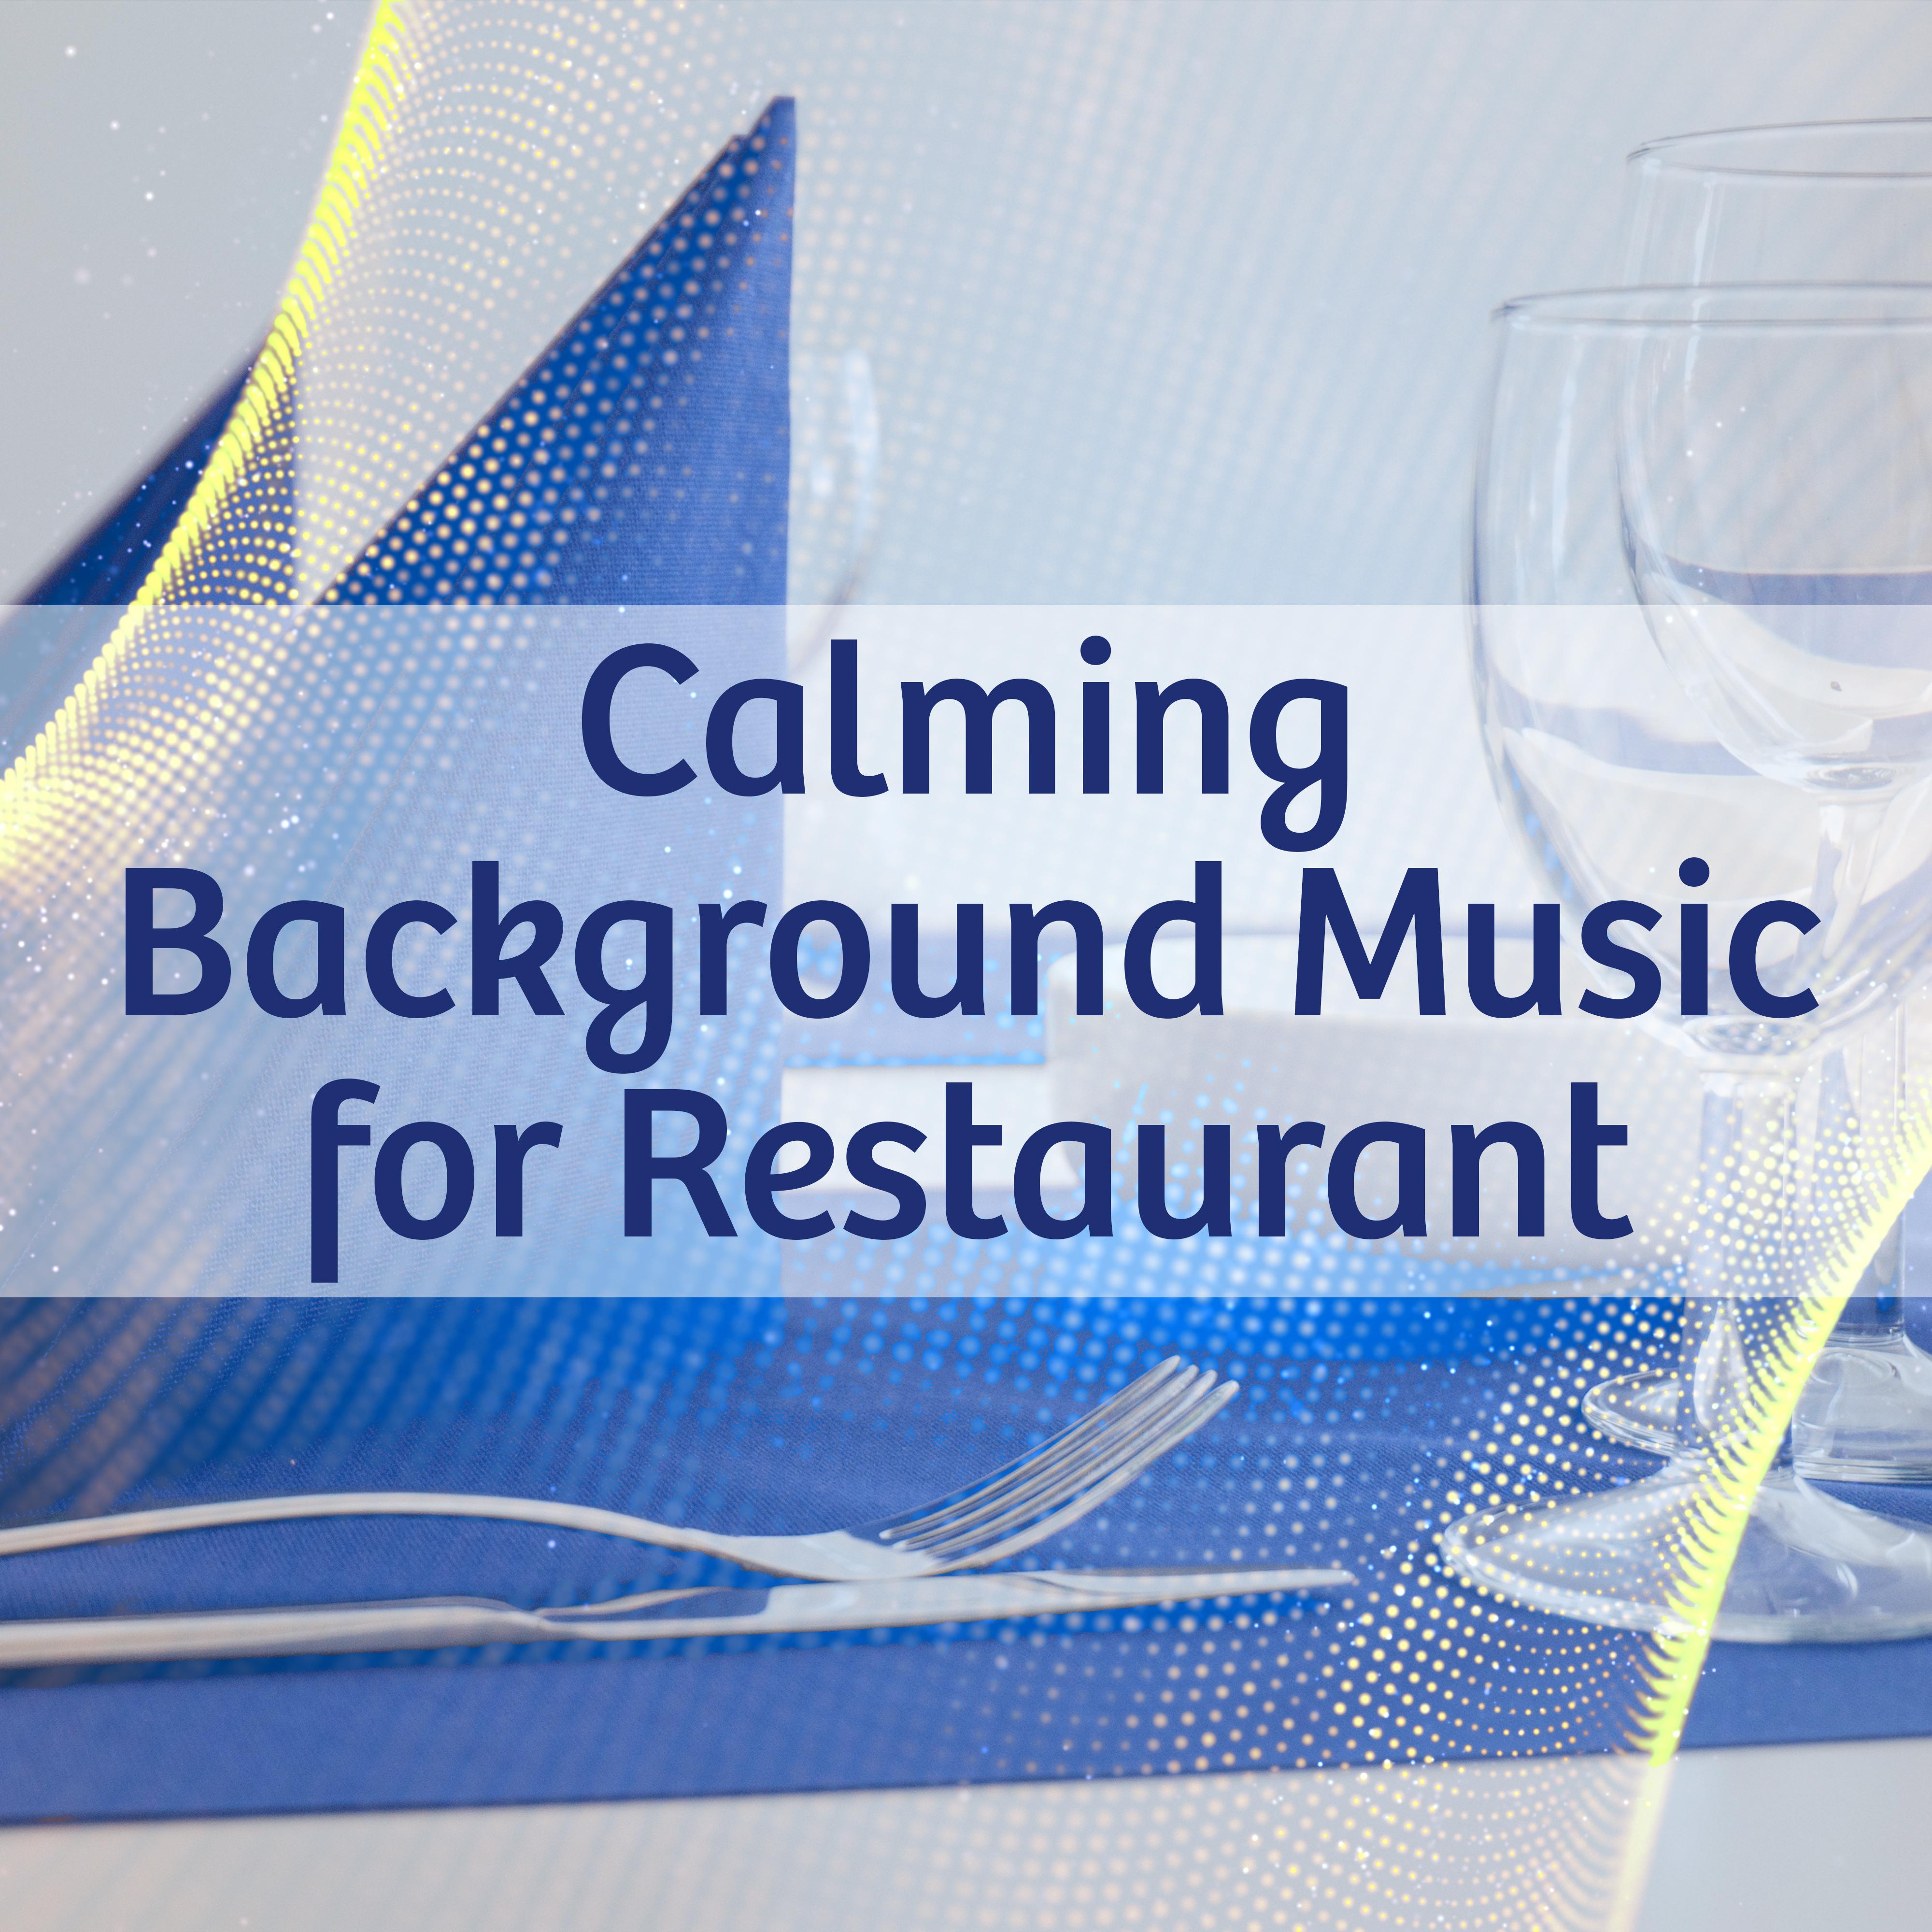 Calming Background Music for Restaurant  Jazz Music to Rest, Soft Sounds, Family Dinner, Coffee Time